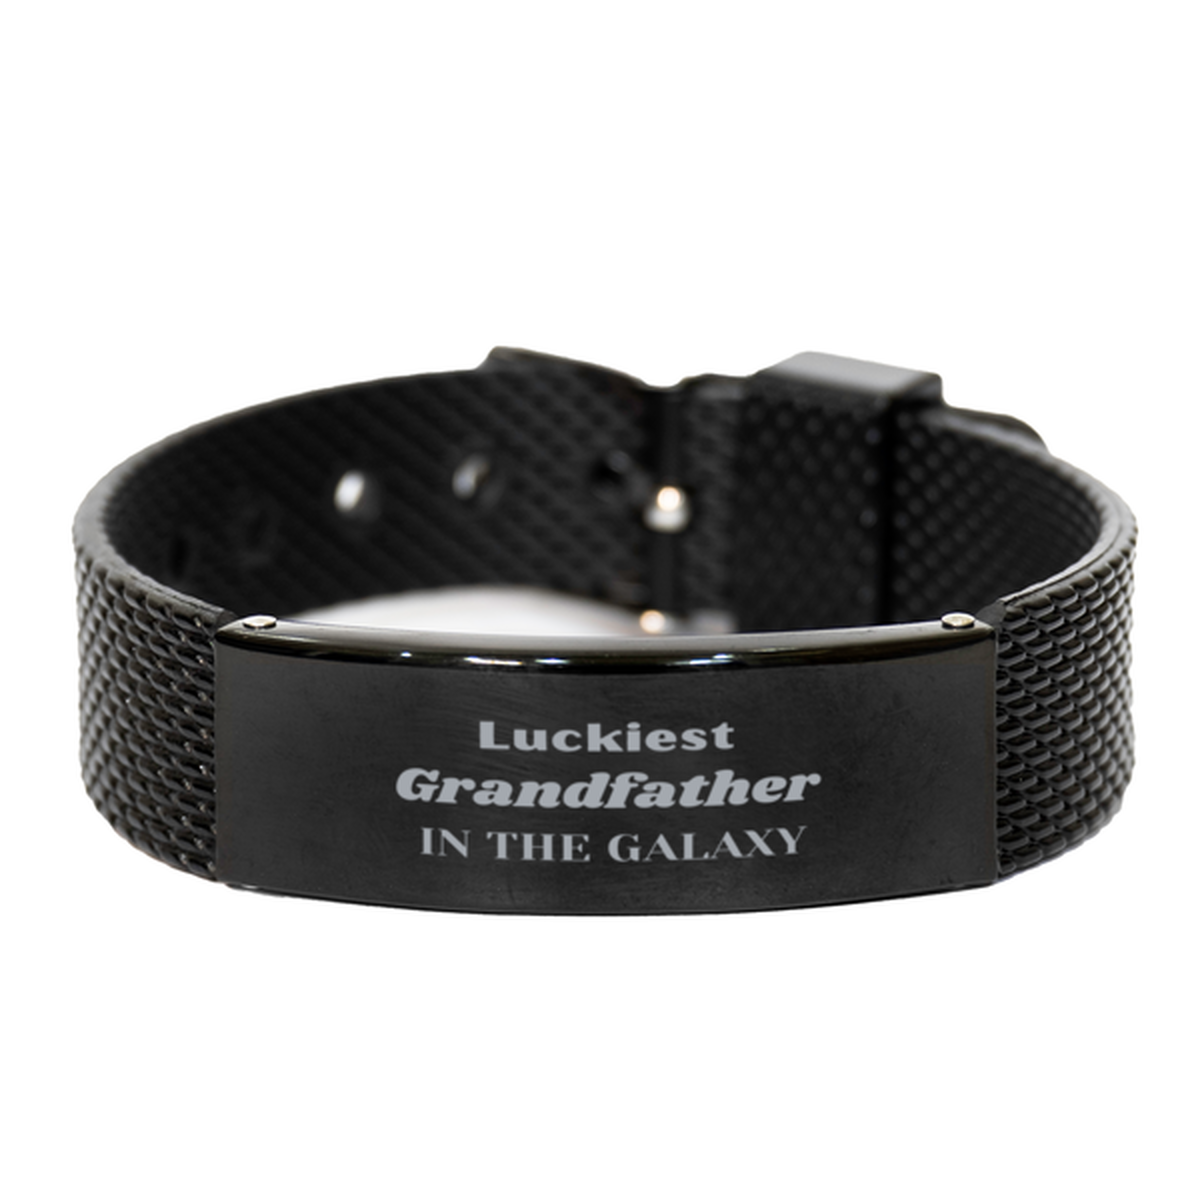 Luckiest Grandfather in the Galaxy, To My Grandfather Engraved Gifts, Christmas Grandfather Black Shark Mesh Bracelet Gifts, X-mas Birthday Unique Gifts For Grandfather Men Women